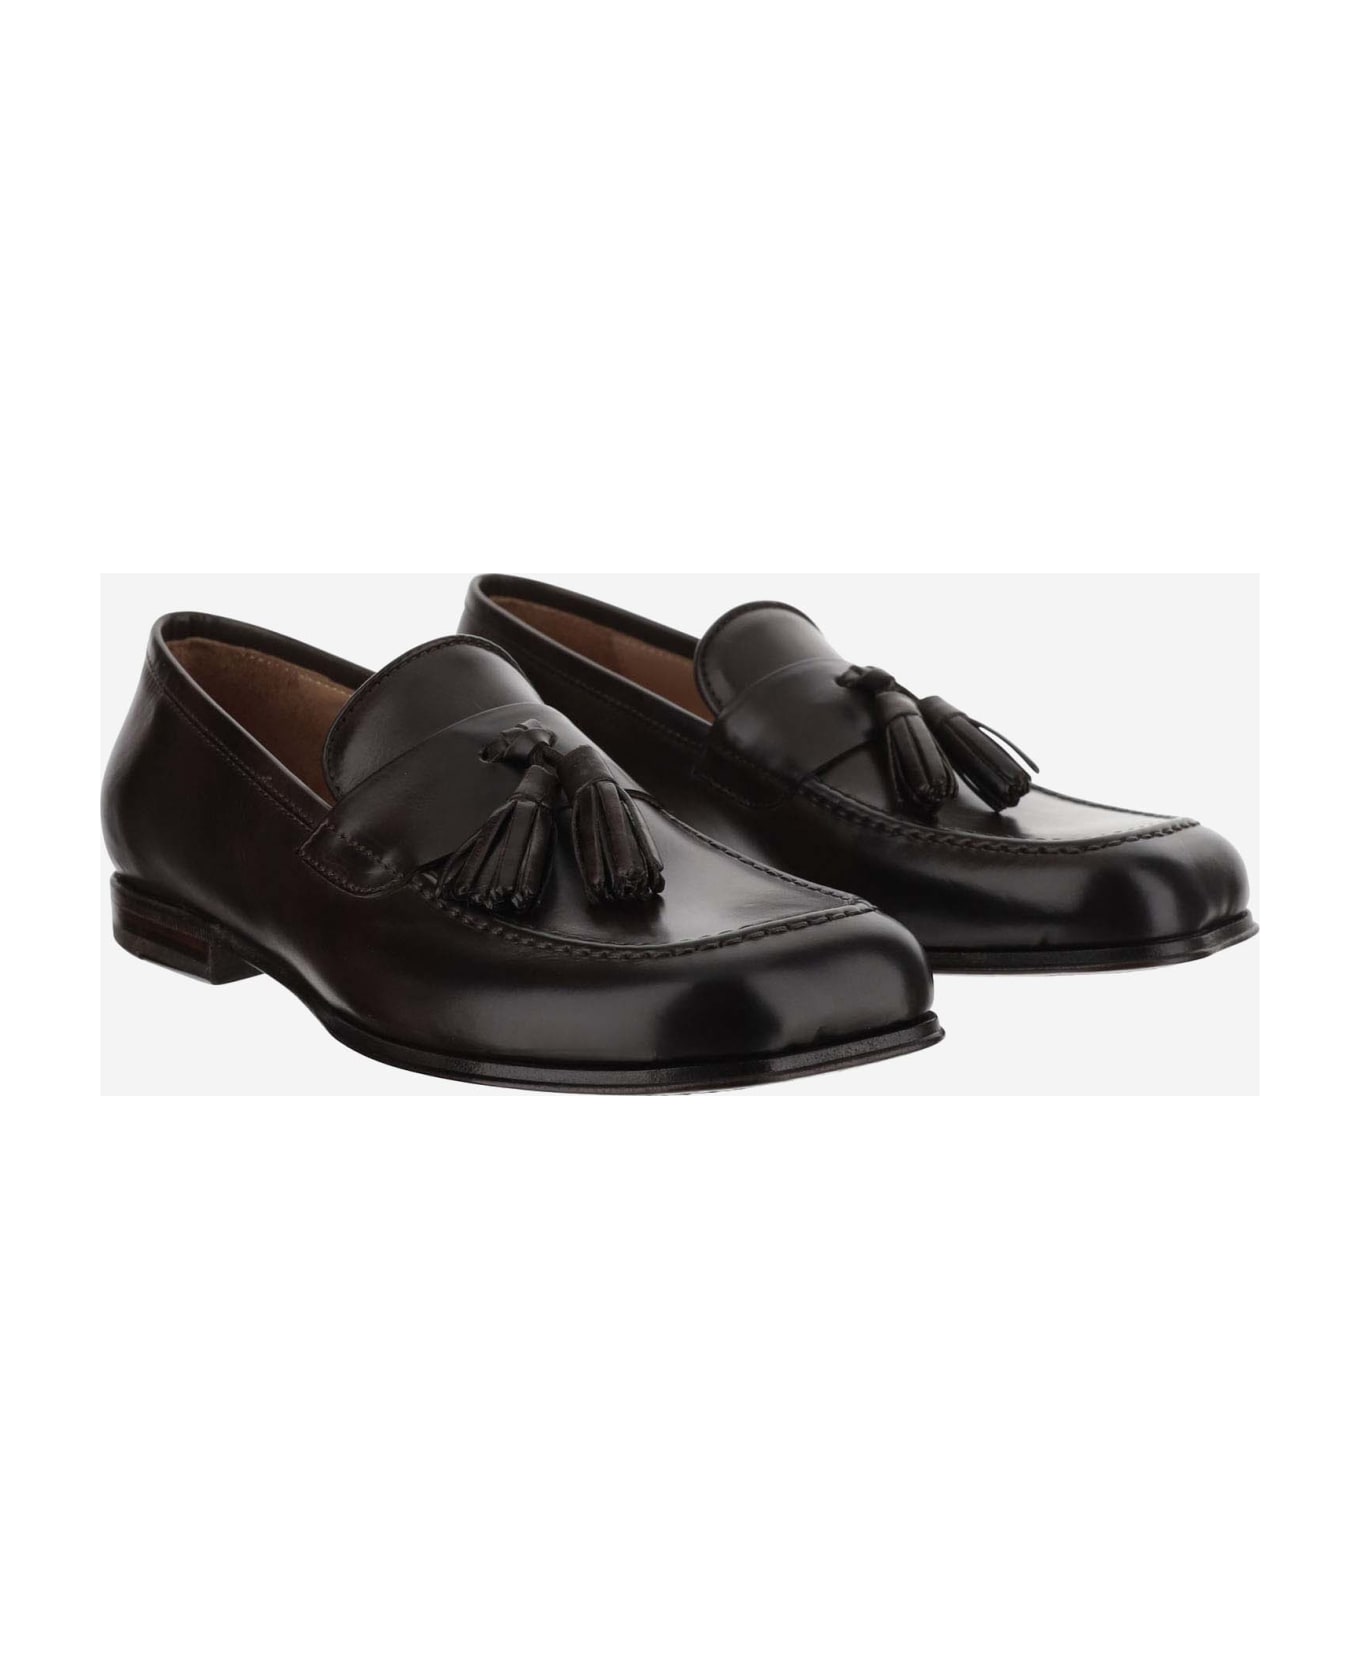 Hervè Chapelier Leather Loafers - Brown フラットシューズ